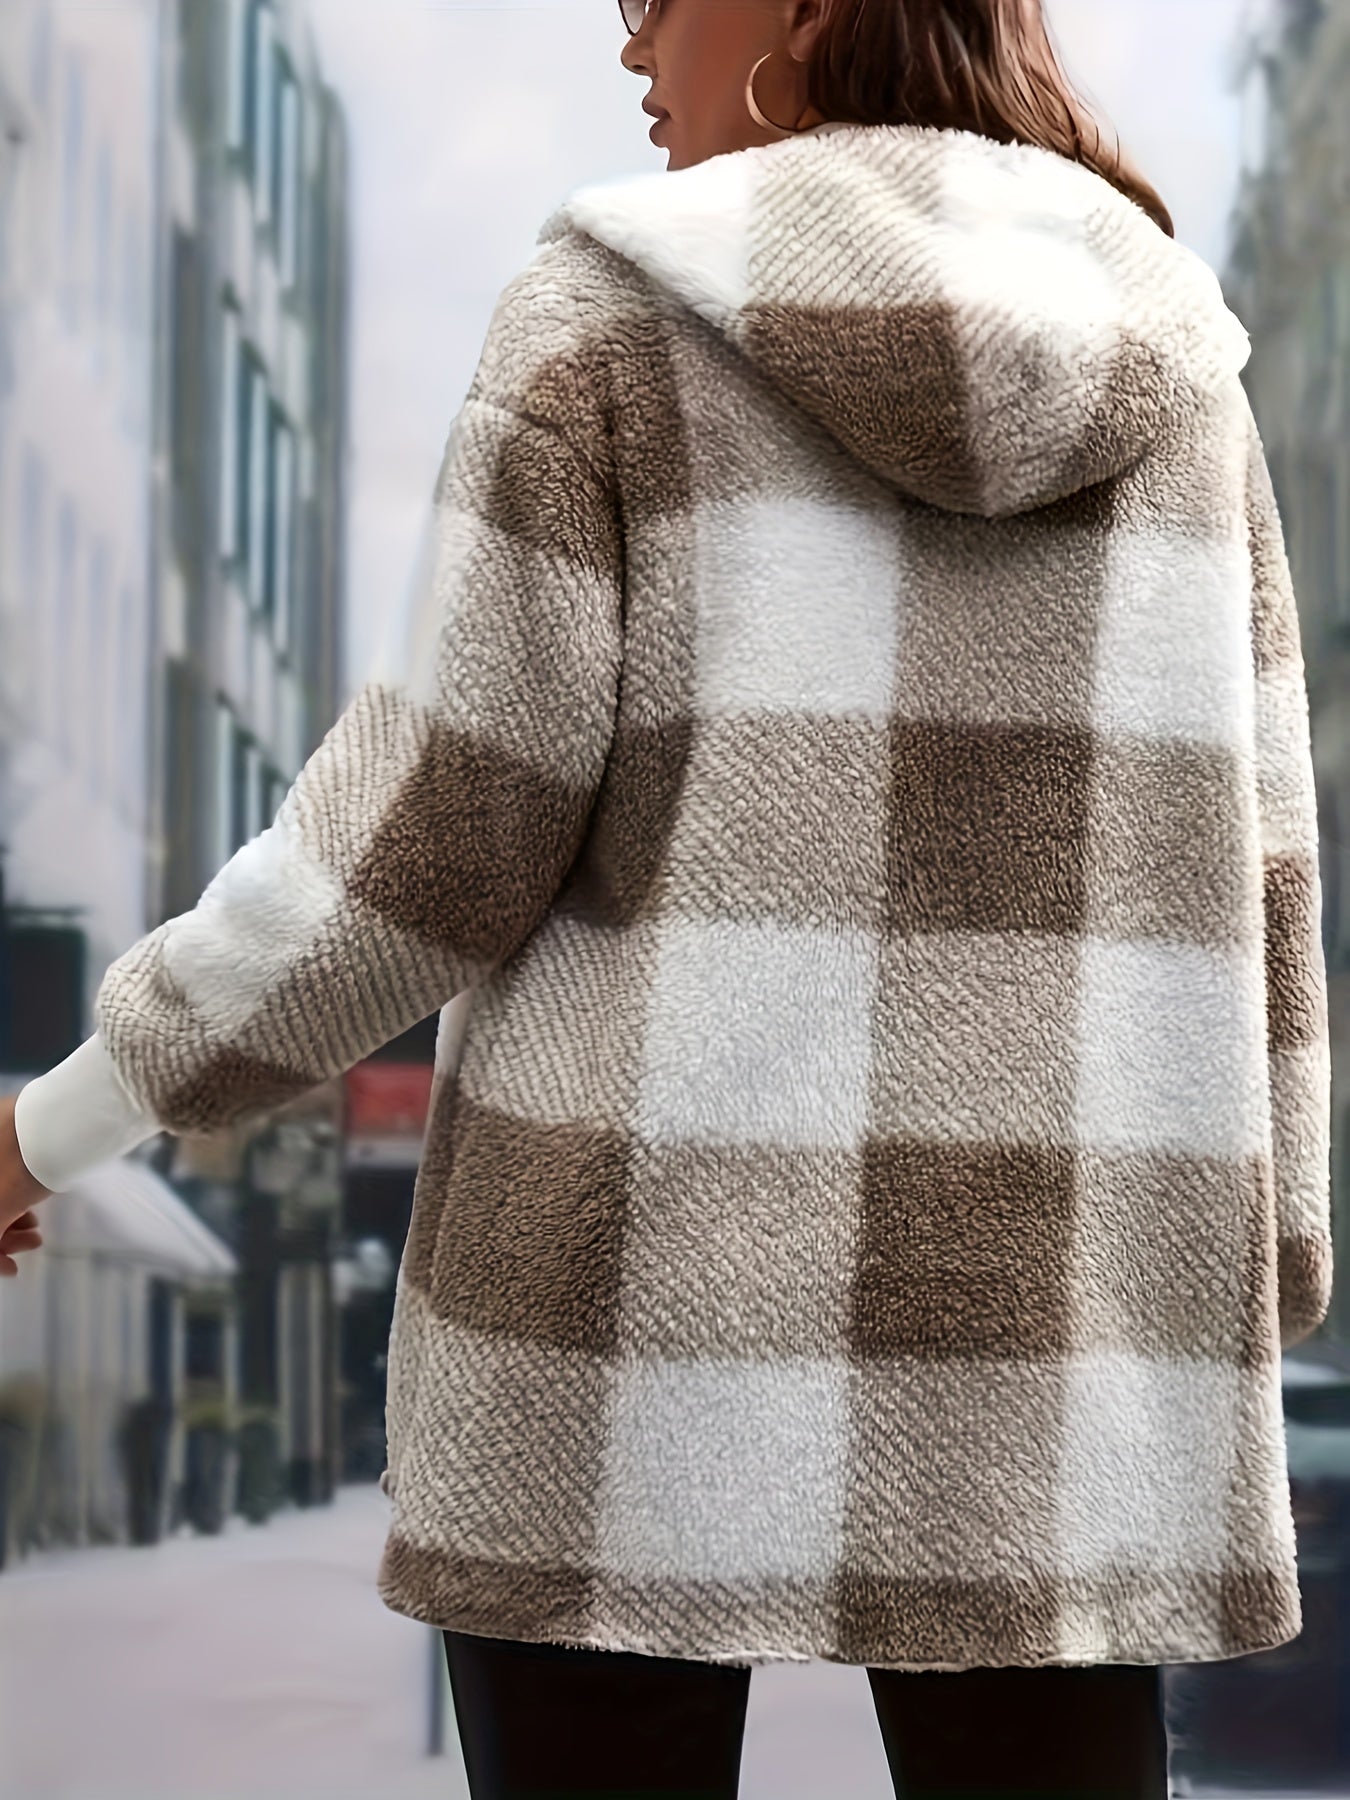 Plaid Print Hooded Teddy Coat, Casual Open Front Thermal Outerwear, Women's Clothing